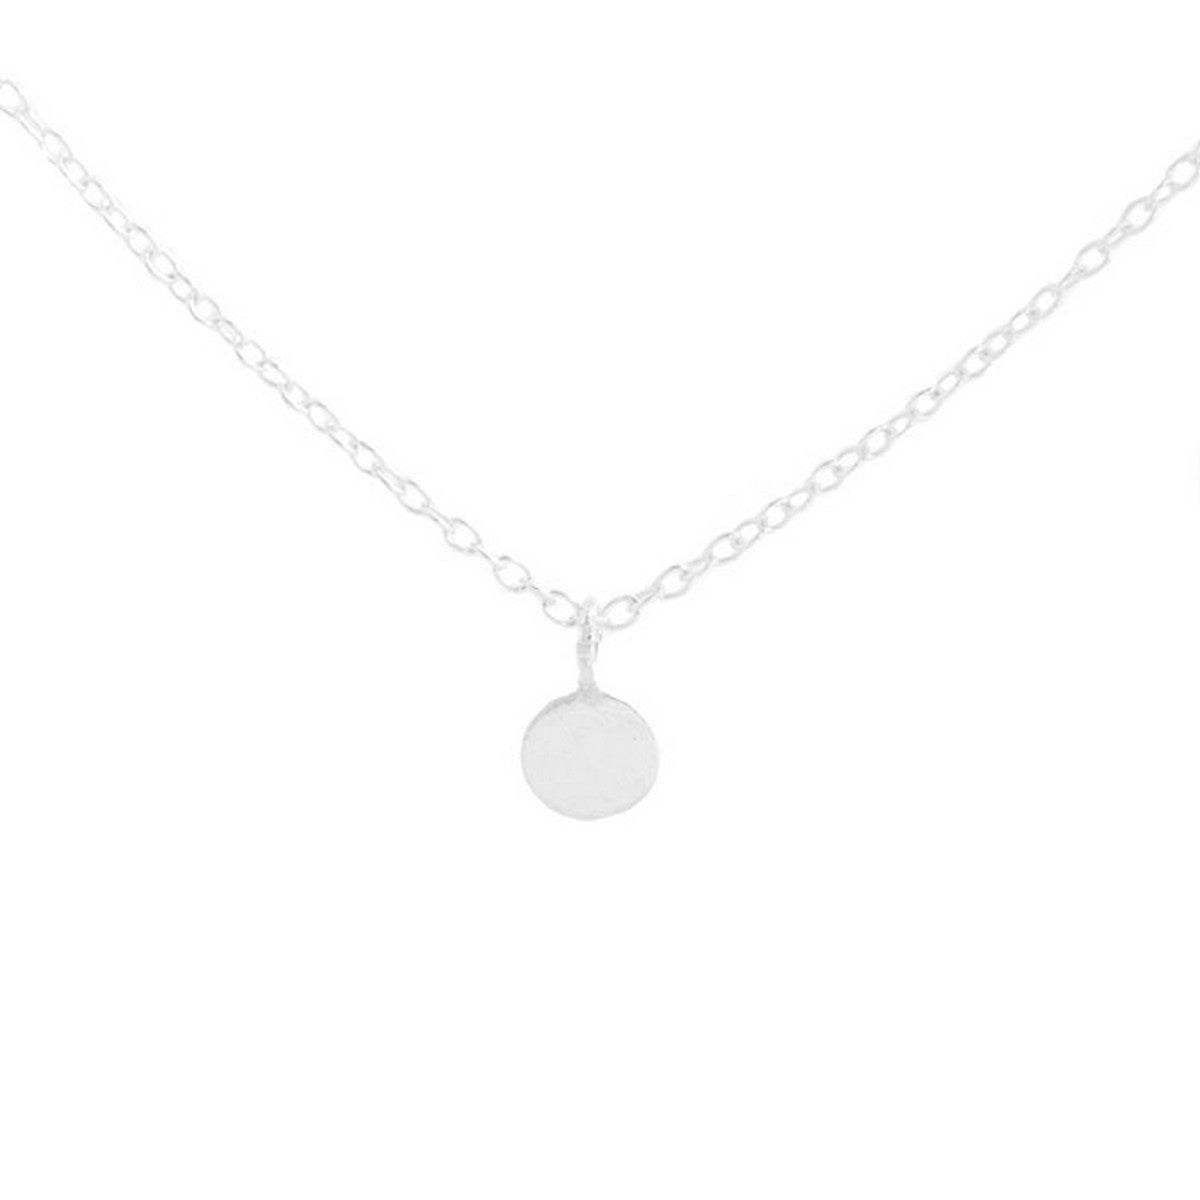 coin-ketting-925-zilver-1